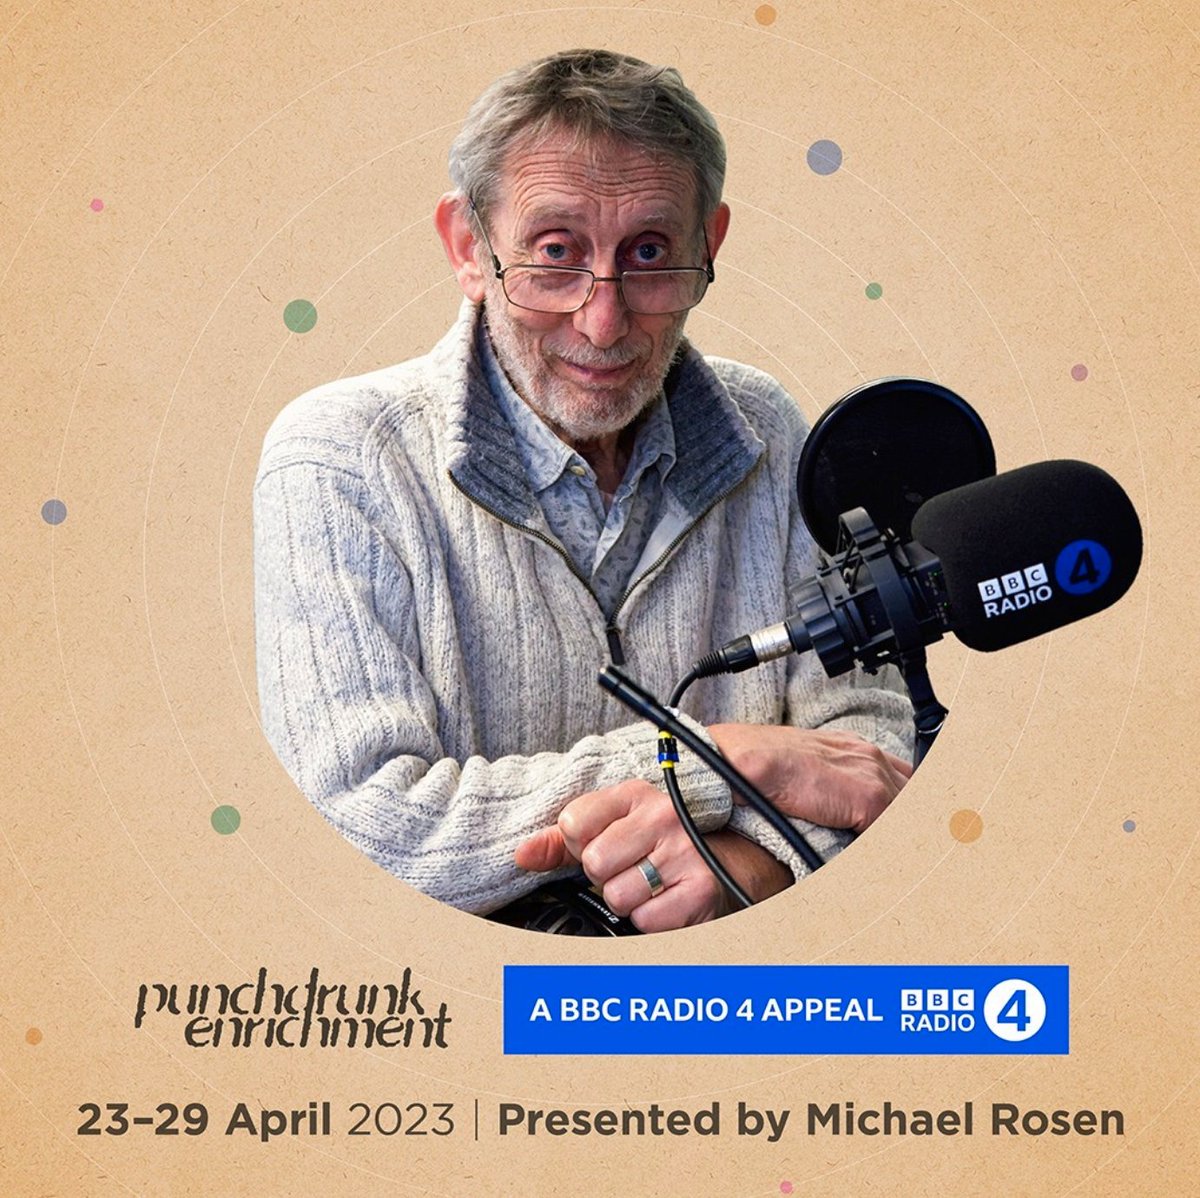 Support @PDEnrich's mission to bring immersive experiences to schools, communities, and families. Listen to their charity appeal presented by @MichaelRosenYes on @BBCRadio4 from 23-29April. Discover more: punchdrunkenrichment.org.uk/radio4appeal #R4Appeal